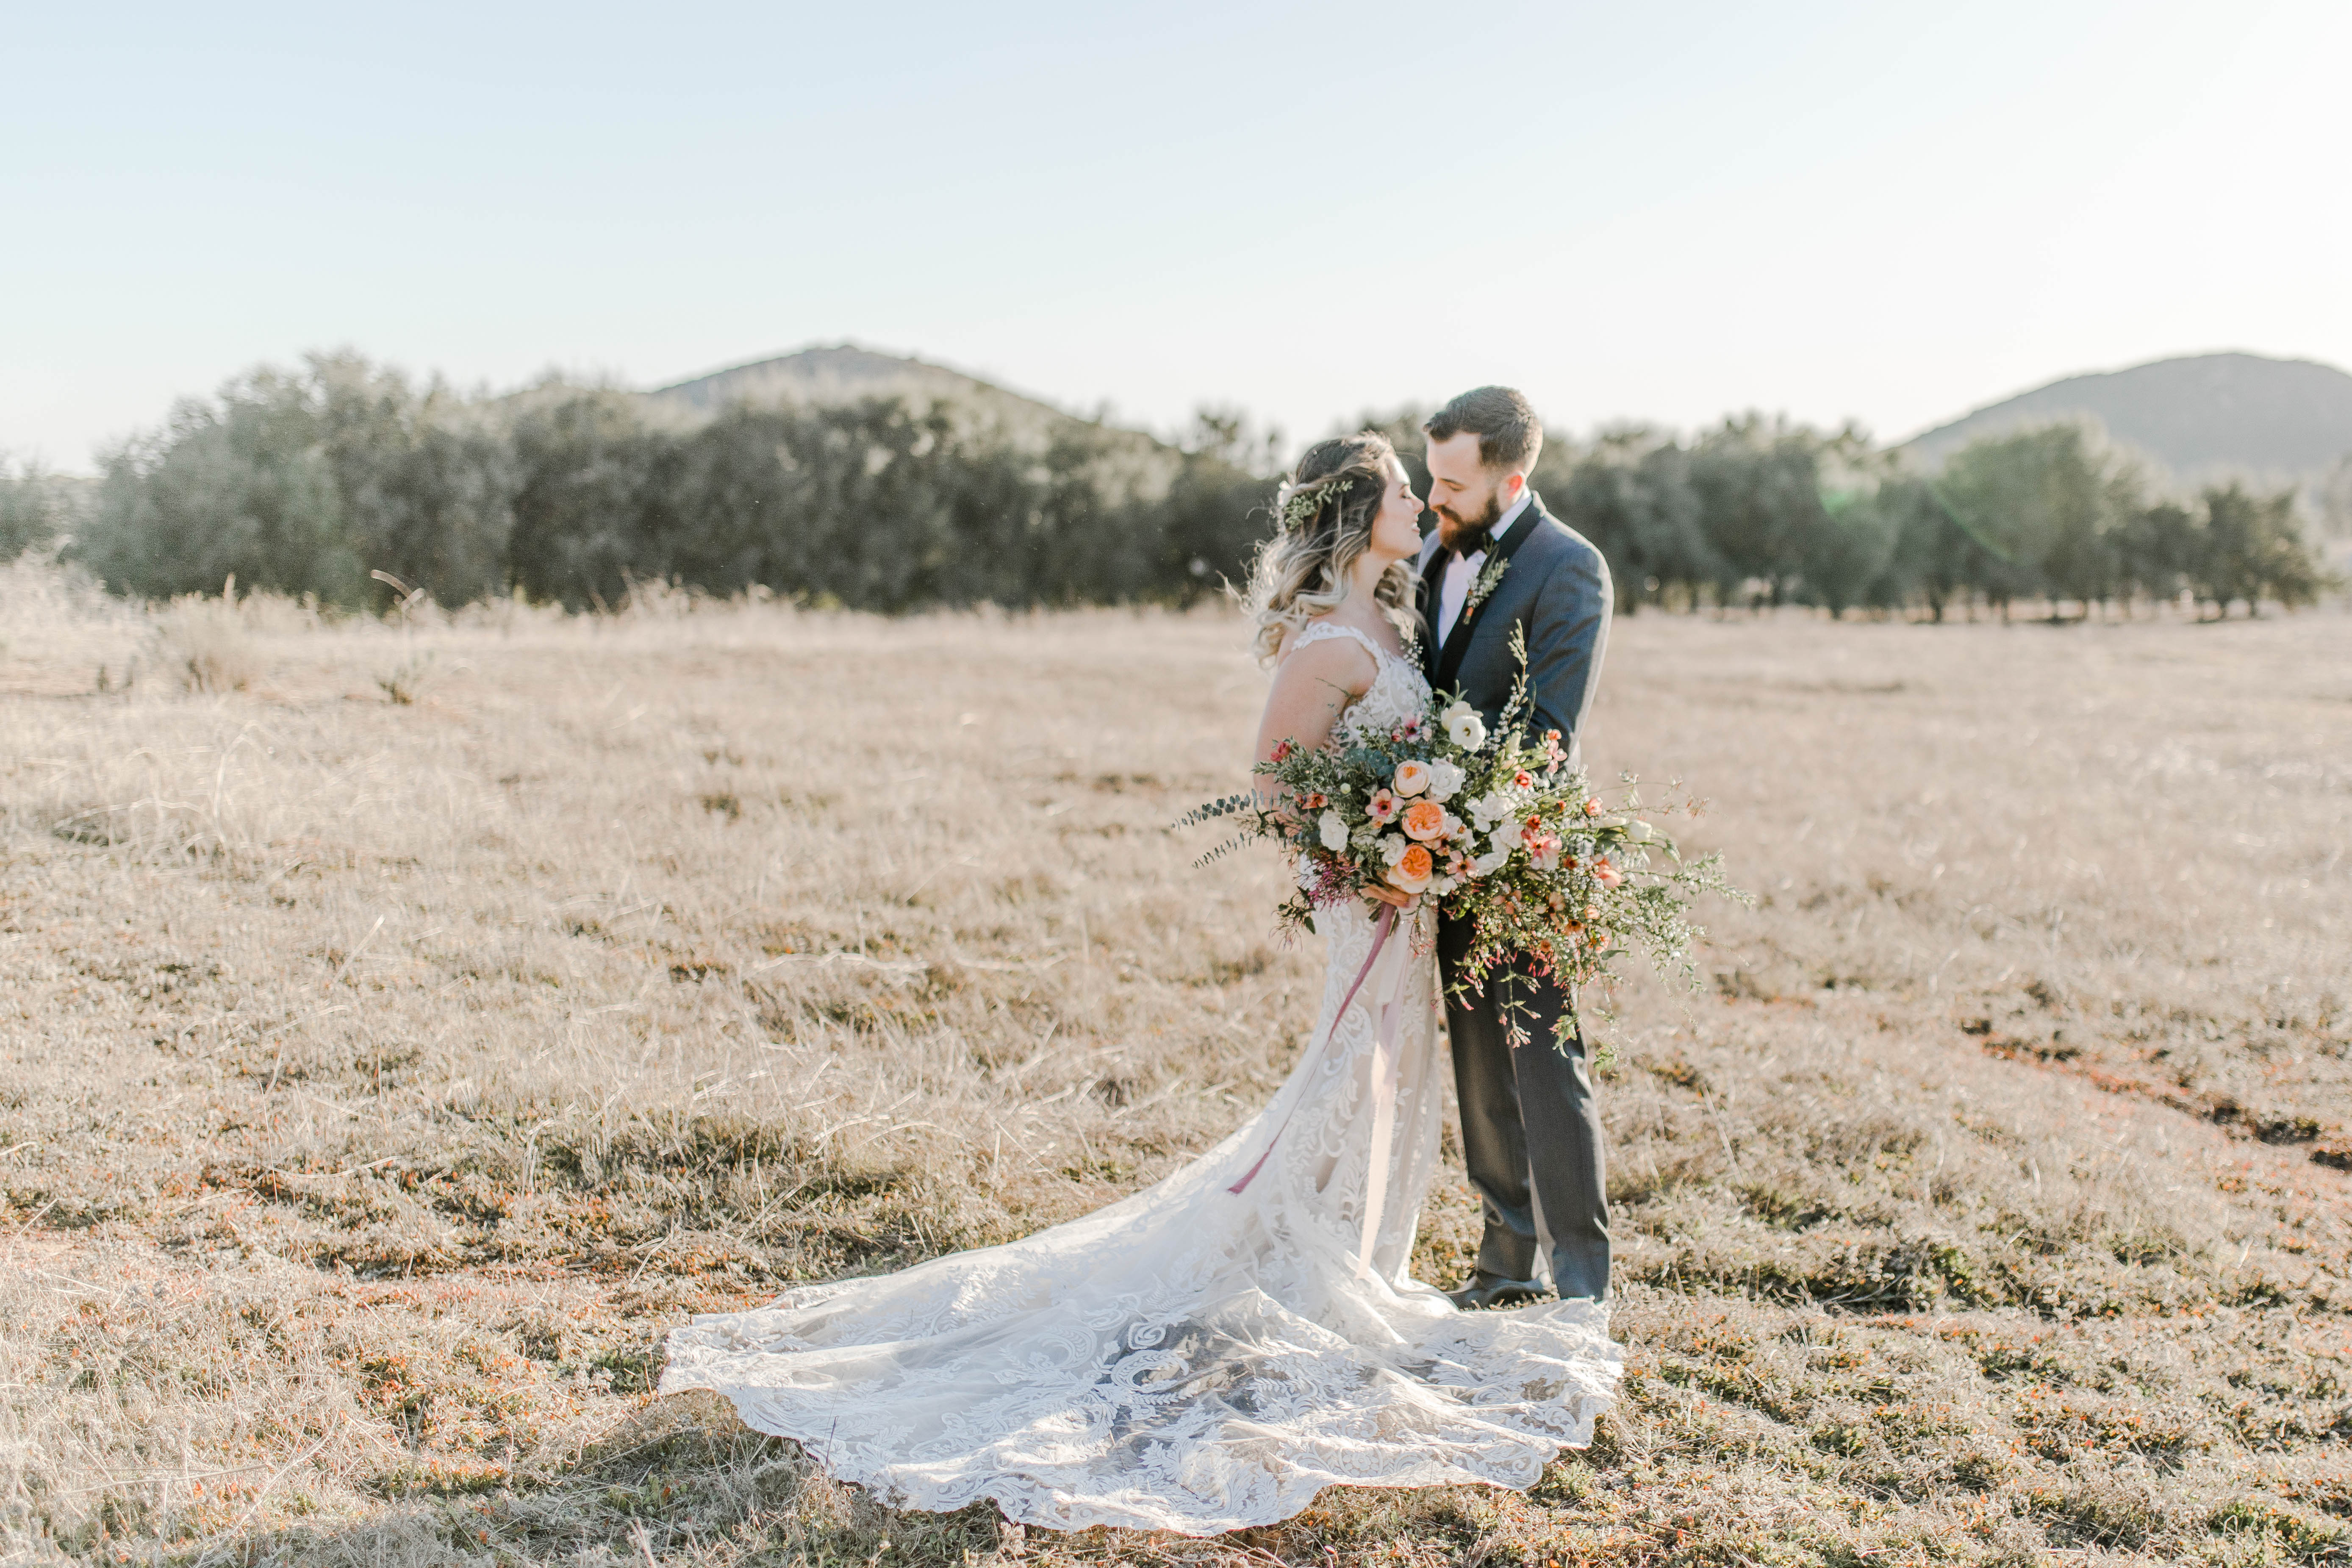 Iron Mountain Commercial Bridal Shoot | San Diego Wedding Photography by Bree and Stephen - San Diego Wedding Photography - Southern California Weddings